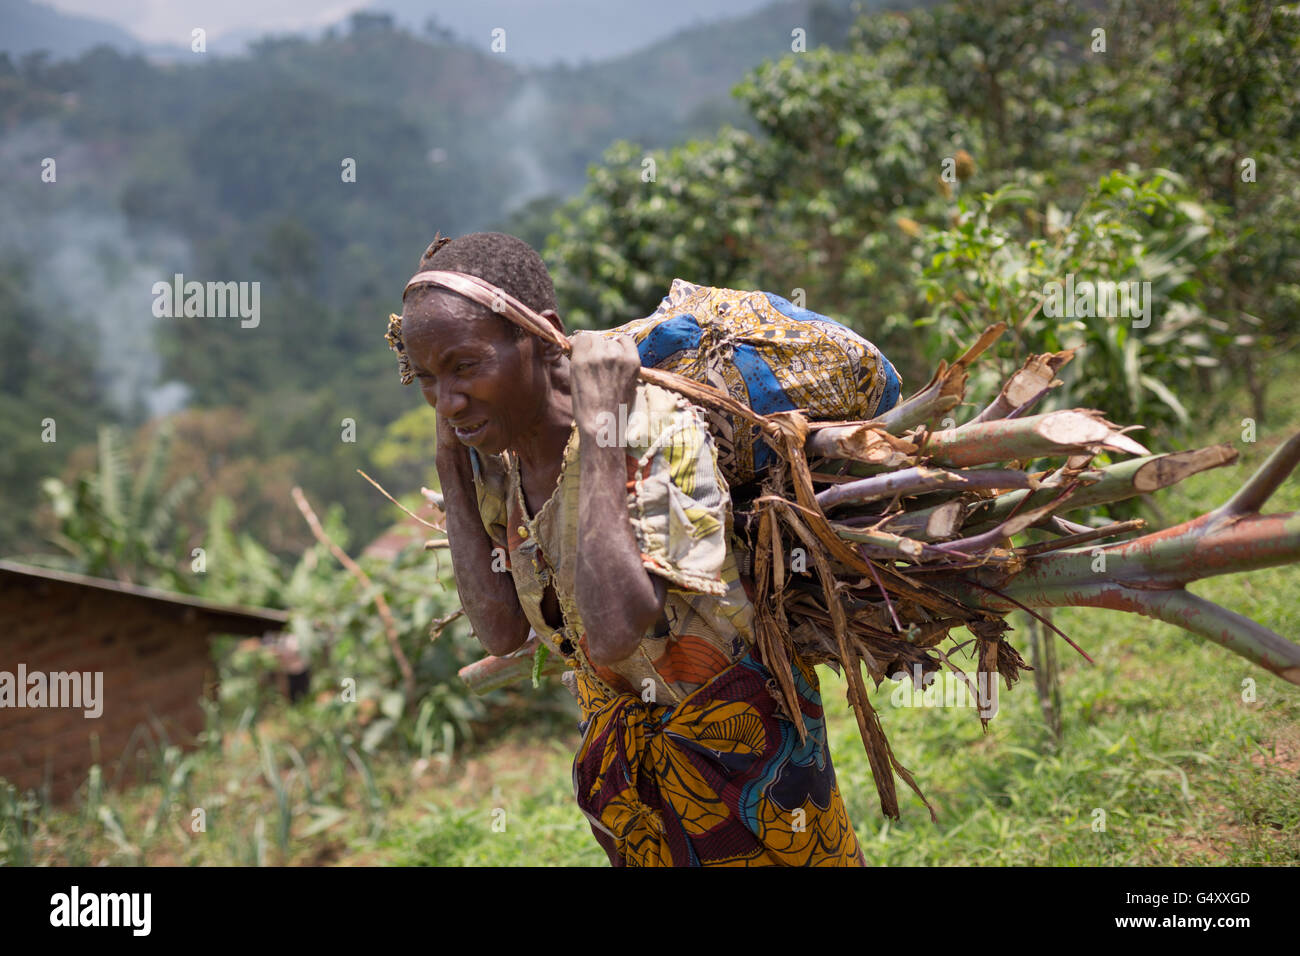 A woman carries firewood down a rural village lane in the foothills of the Rwenzori Mountains on the DRC / Uganda border. Stock Photo